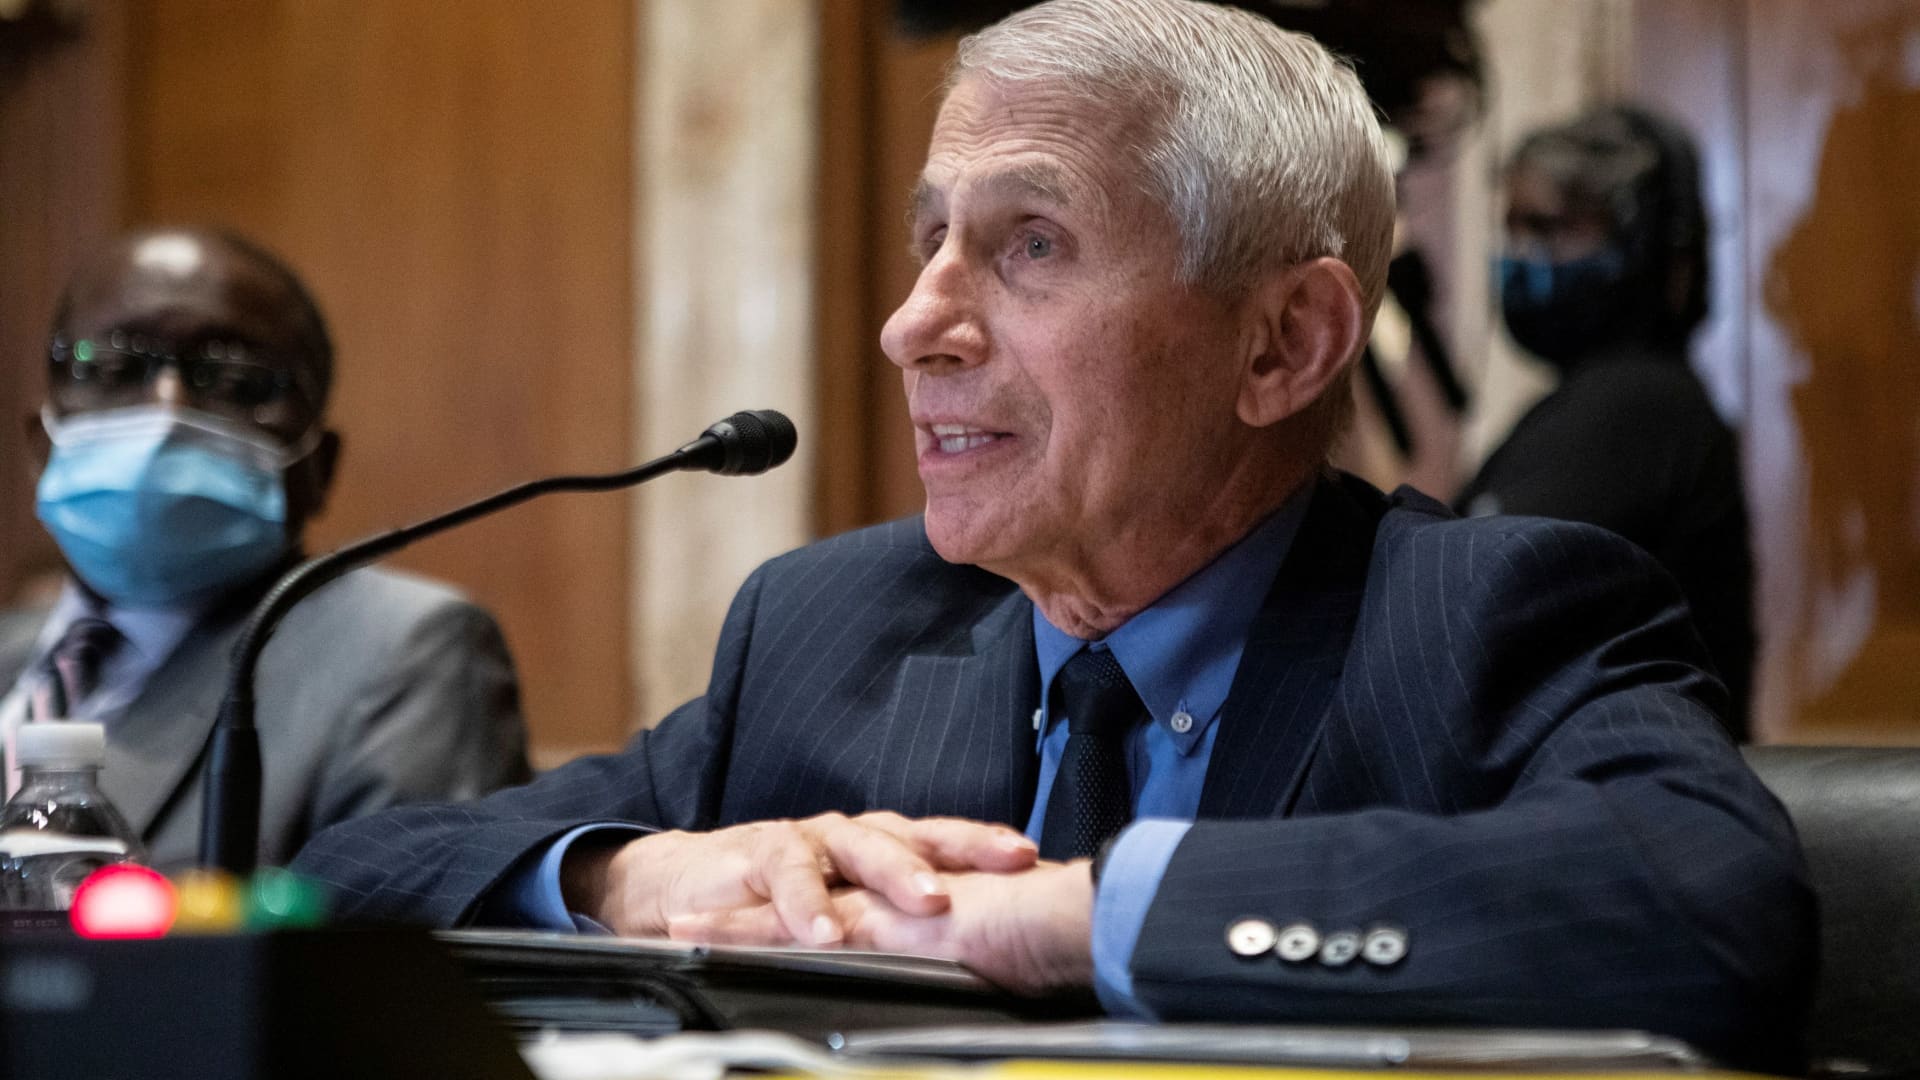 Fauci says China has done a bad job of vaccinating the elderly and their shots are not very effective against Covid